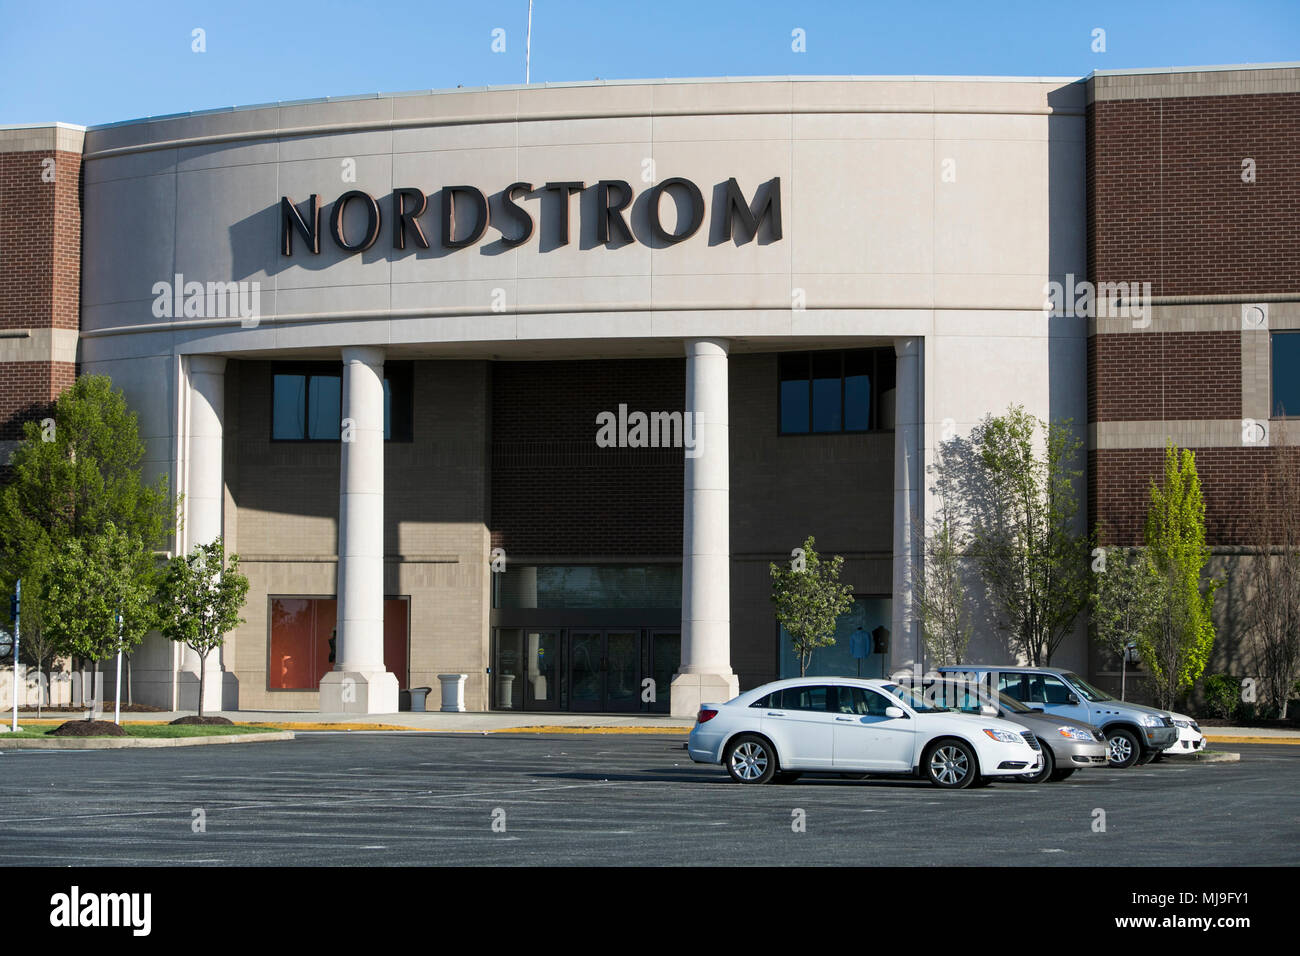 Nordstrom department store and parking lot at Northpark shopping mall,  Dallas, Texas Stock Photo - Alamy